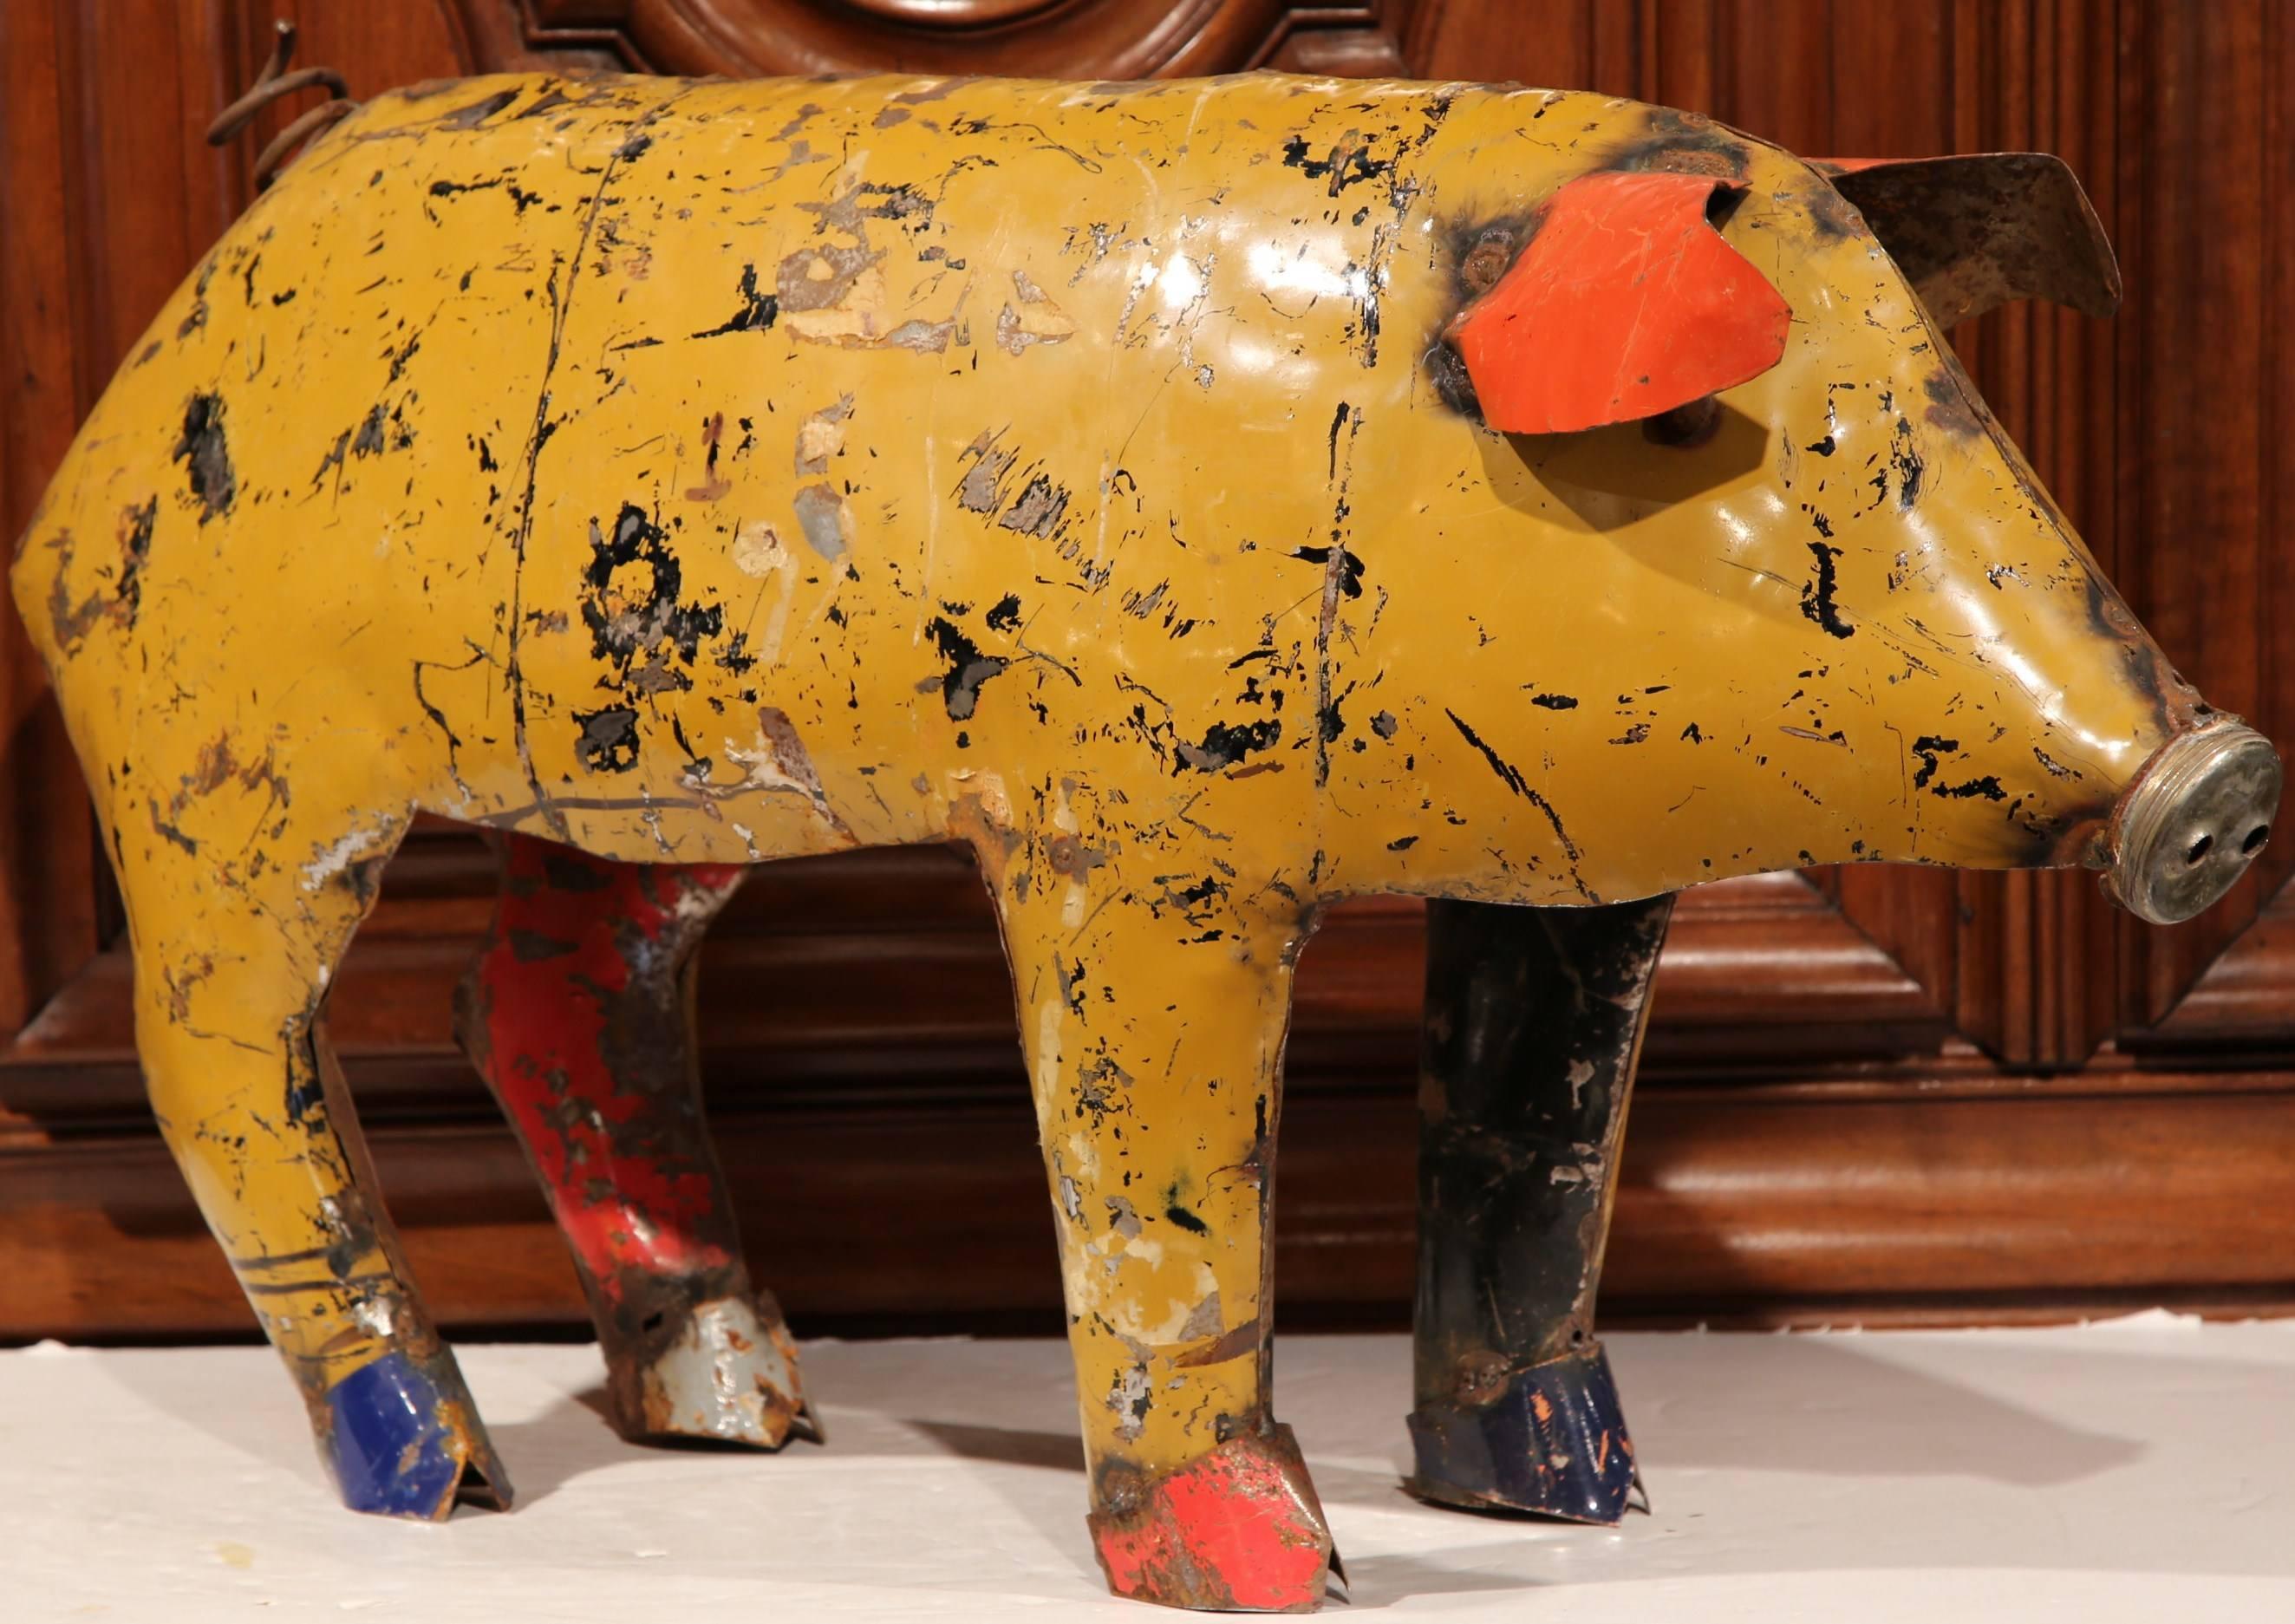 Add French countryside charm to your home with this interesting pig sculpture from Southern France. The farm animal is crafted from old metal elements, and is finished with its original paint. This piece would make a fun, colorful addition for any